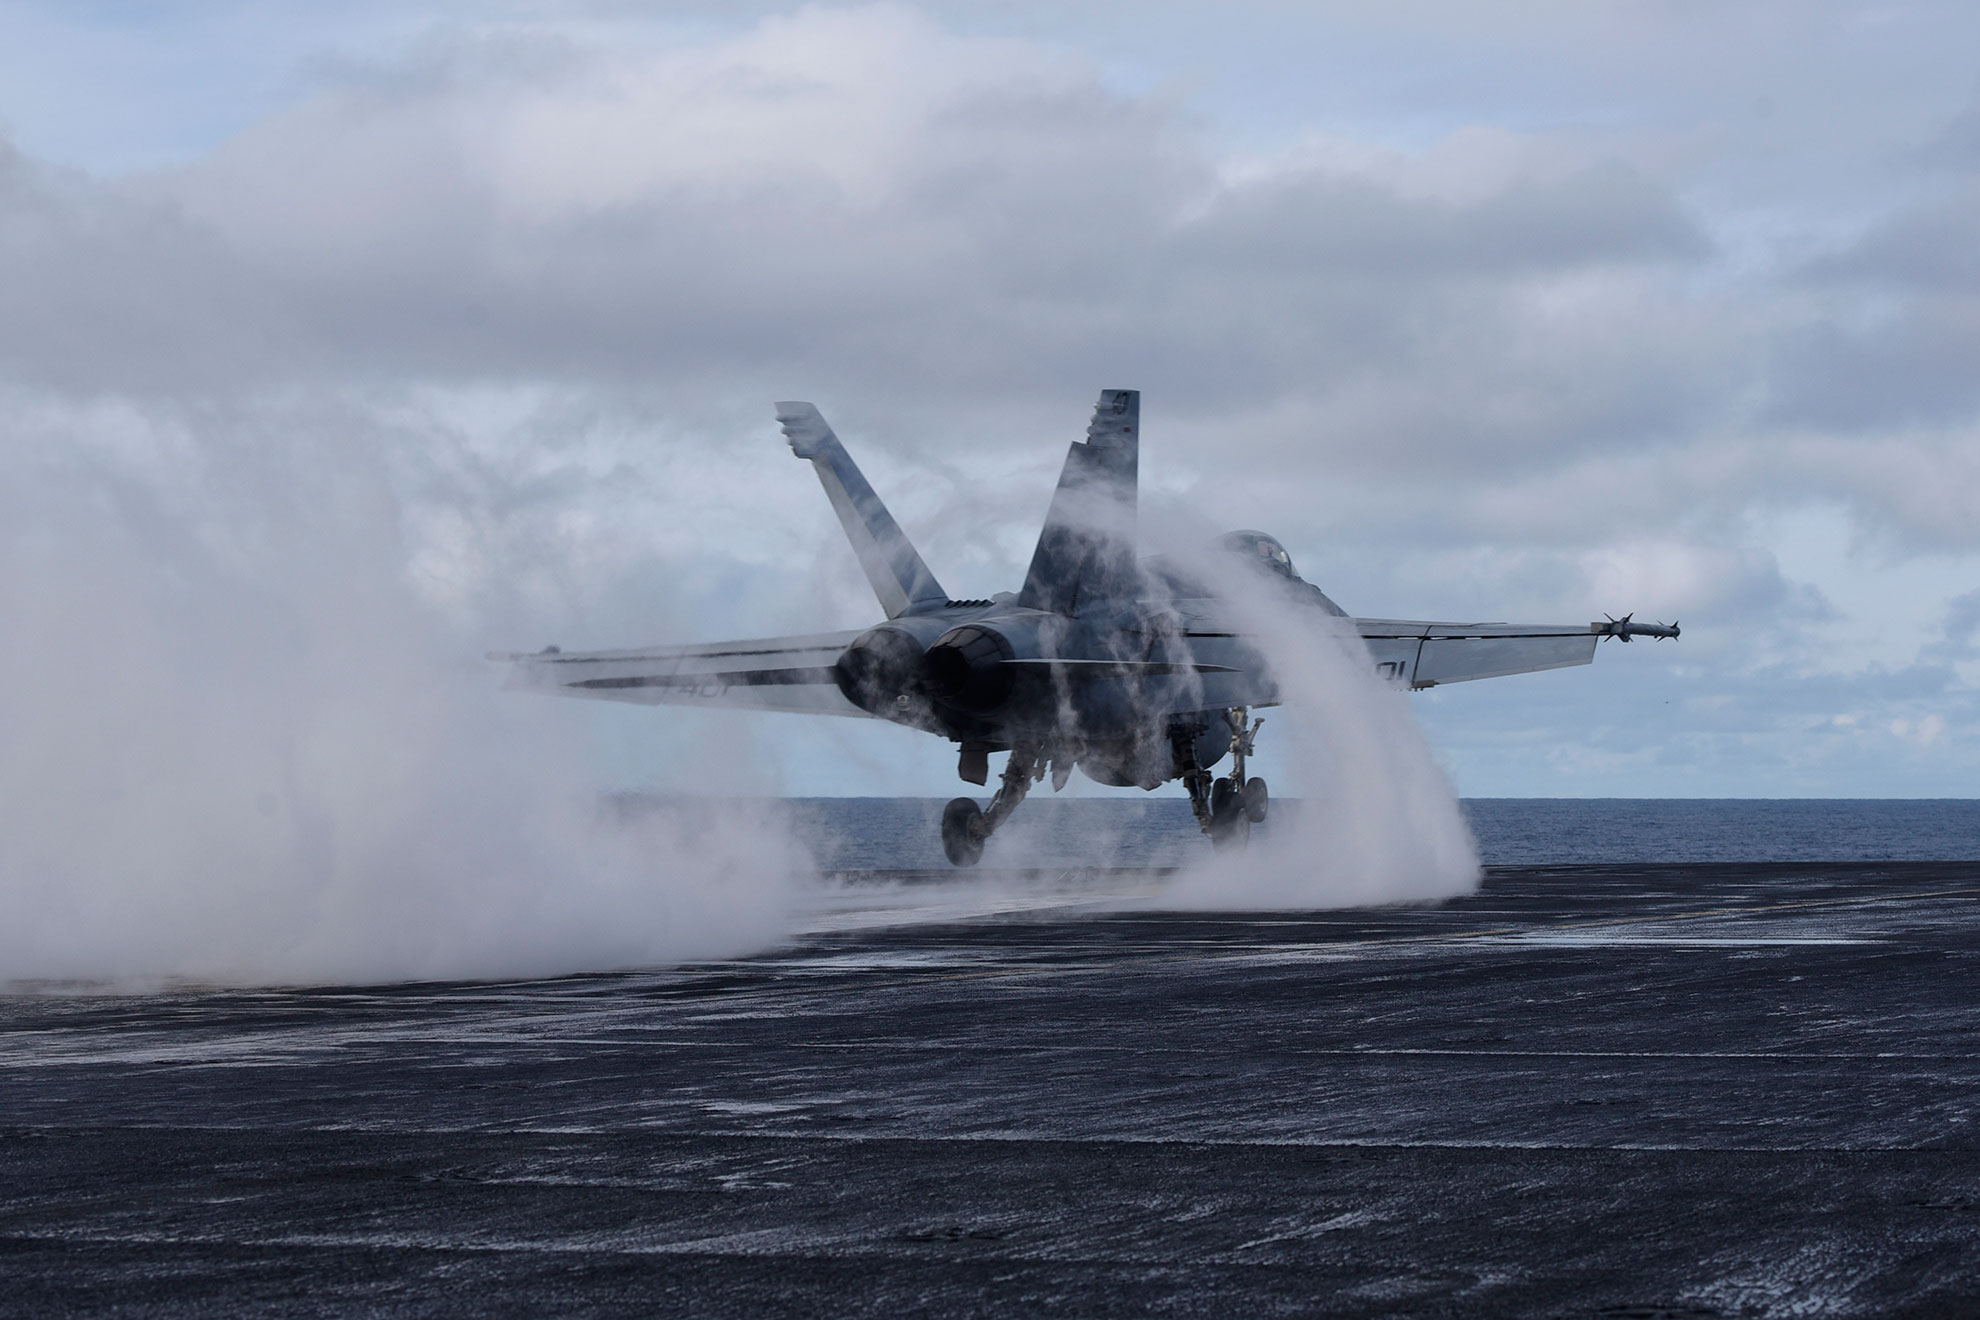 North Atlantic (Sept. 18, 2018) An F/A-18E Super Hornet assigned to the "Sunliners" of Strike Fighter Squadron (VFA) 81 launches from the flight deck during flight operations aboard the Nimitz-class aircraft carrier USS Harry S. Truman (CVN 75) in the North Atlantic, Sept. 18, 2018. The Harry S. Truman Carrier Strike Group is deployed to the U.S. 6th Fleet area of operations, demonstrating commitment to regional allies and partners, combat power, and flexibility of U.S. naval forces to operate wherever and whenever the nation requires -- U.S. Navy photo by MCS2 Anthony Flynn. -